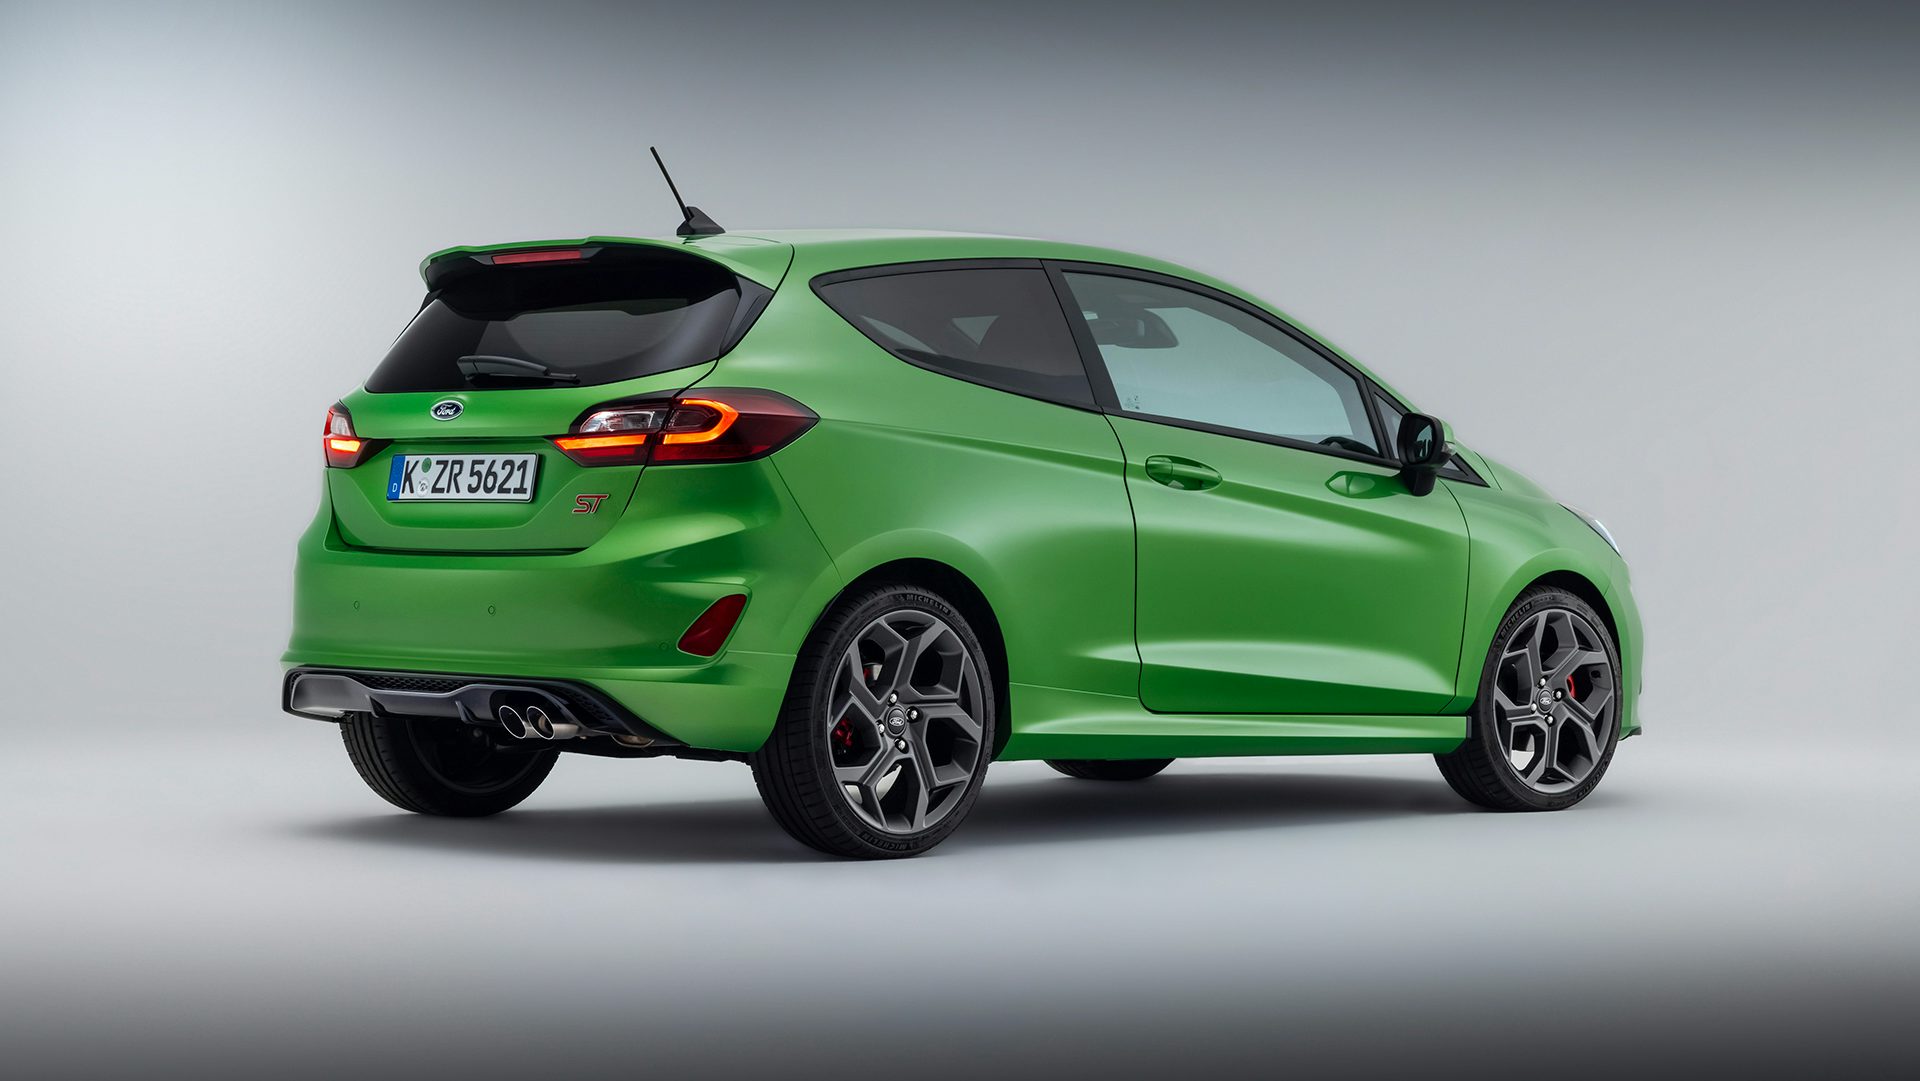 2022 Ford Fiesta and Fiesta ST facelift revealed price, specs and